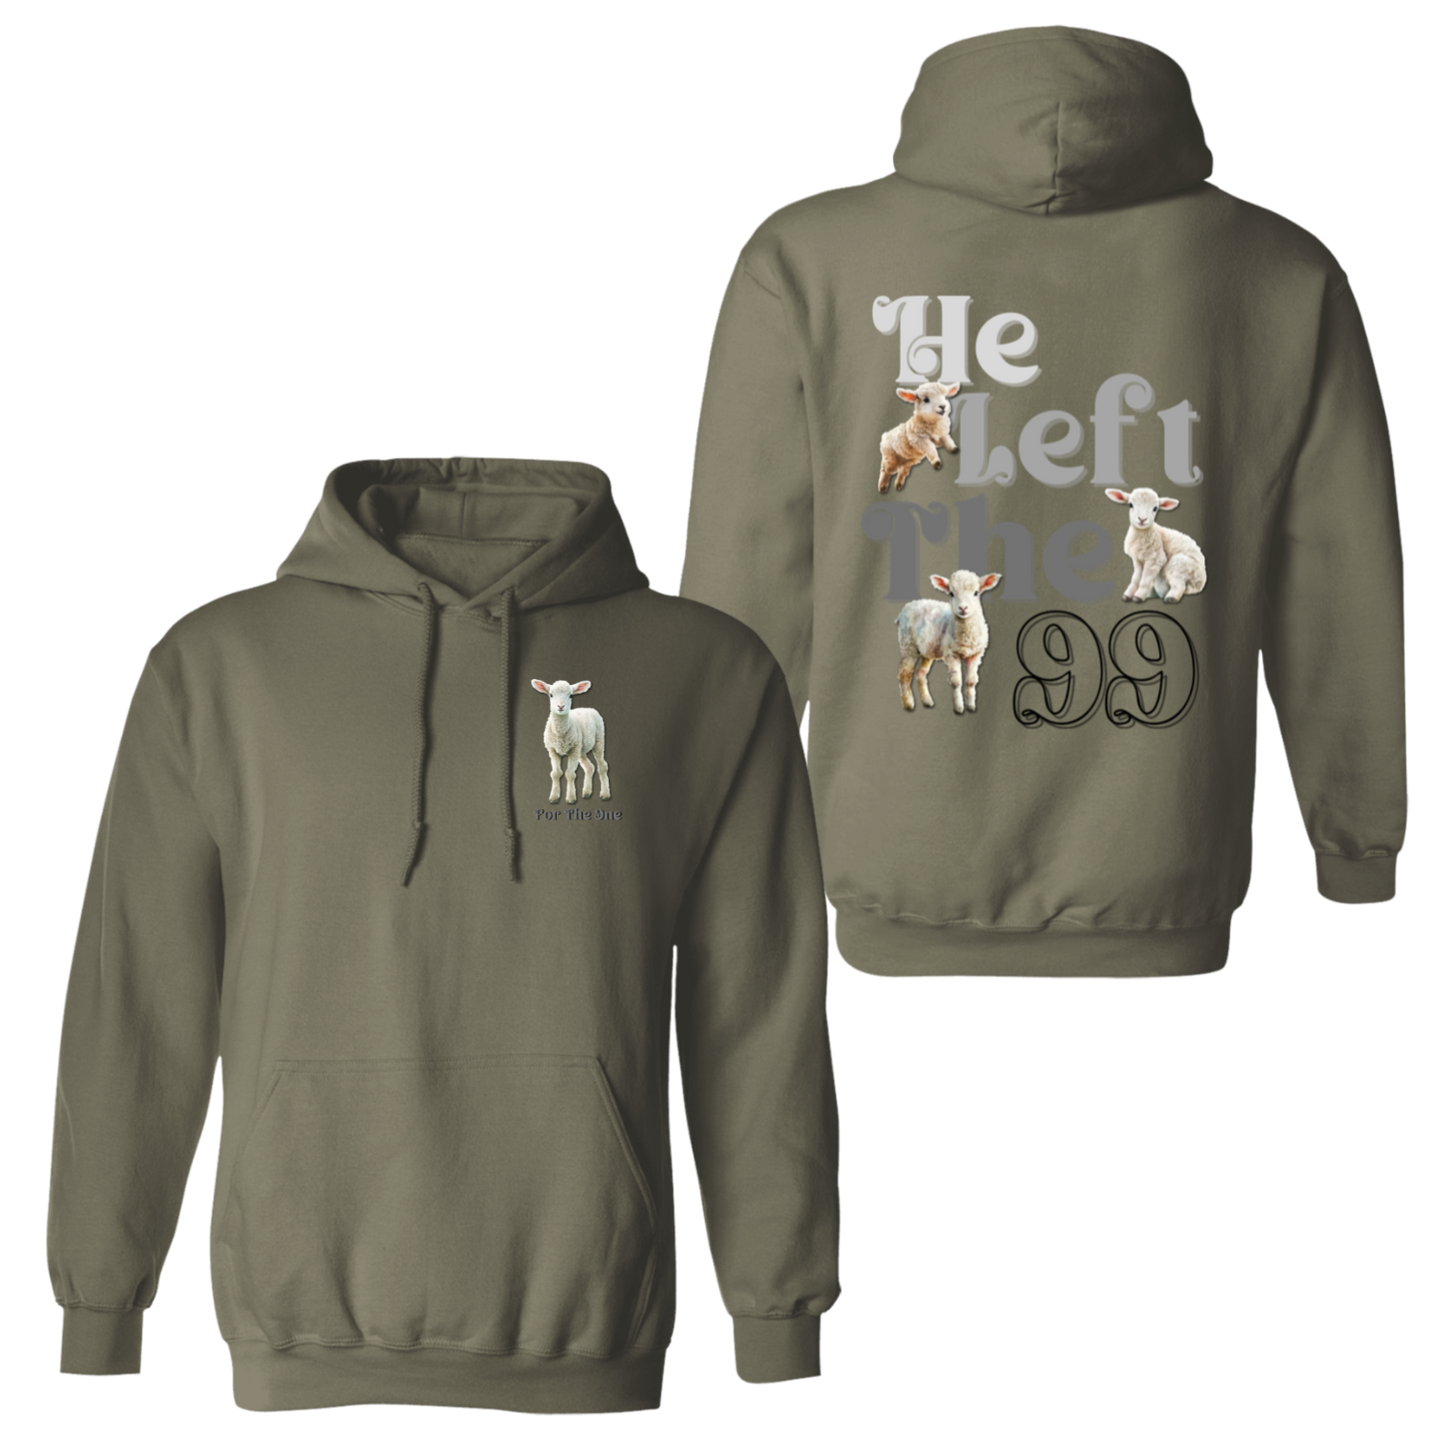 He Left The 99 | Pullover Hoodie